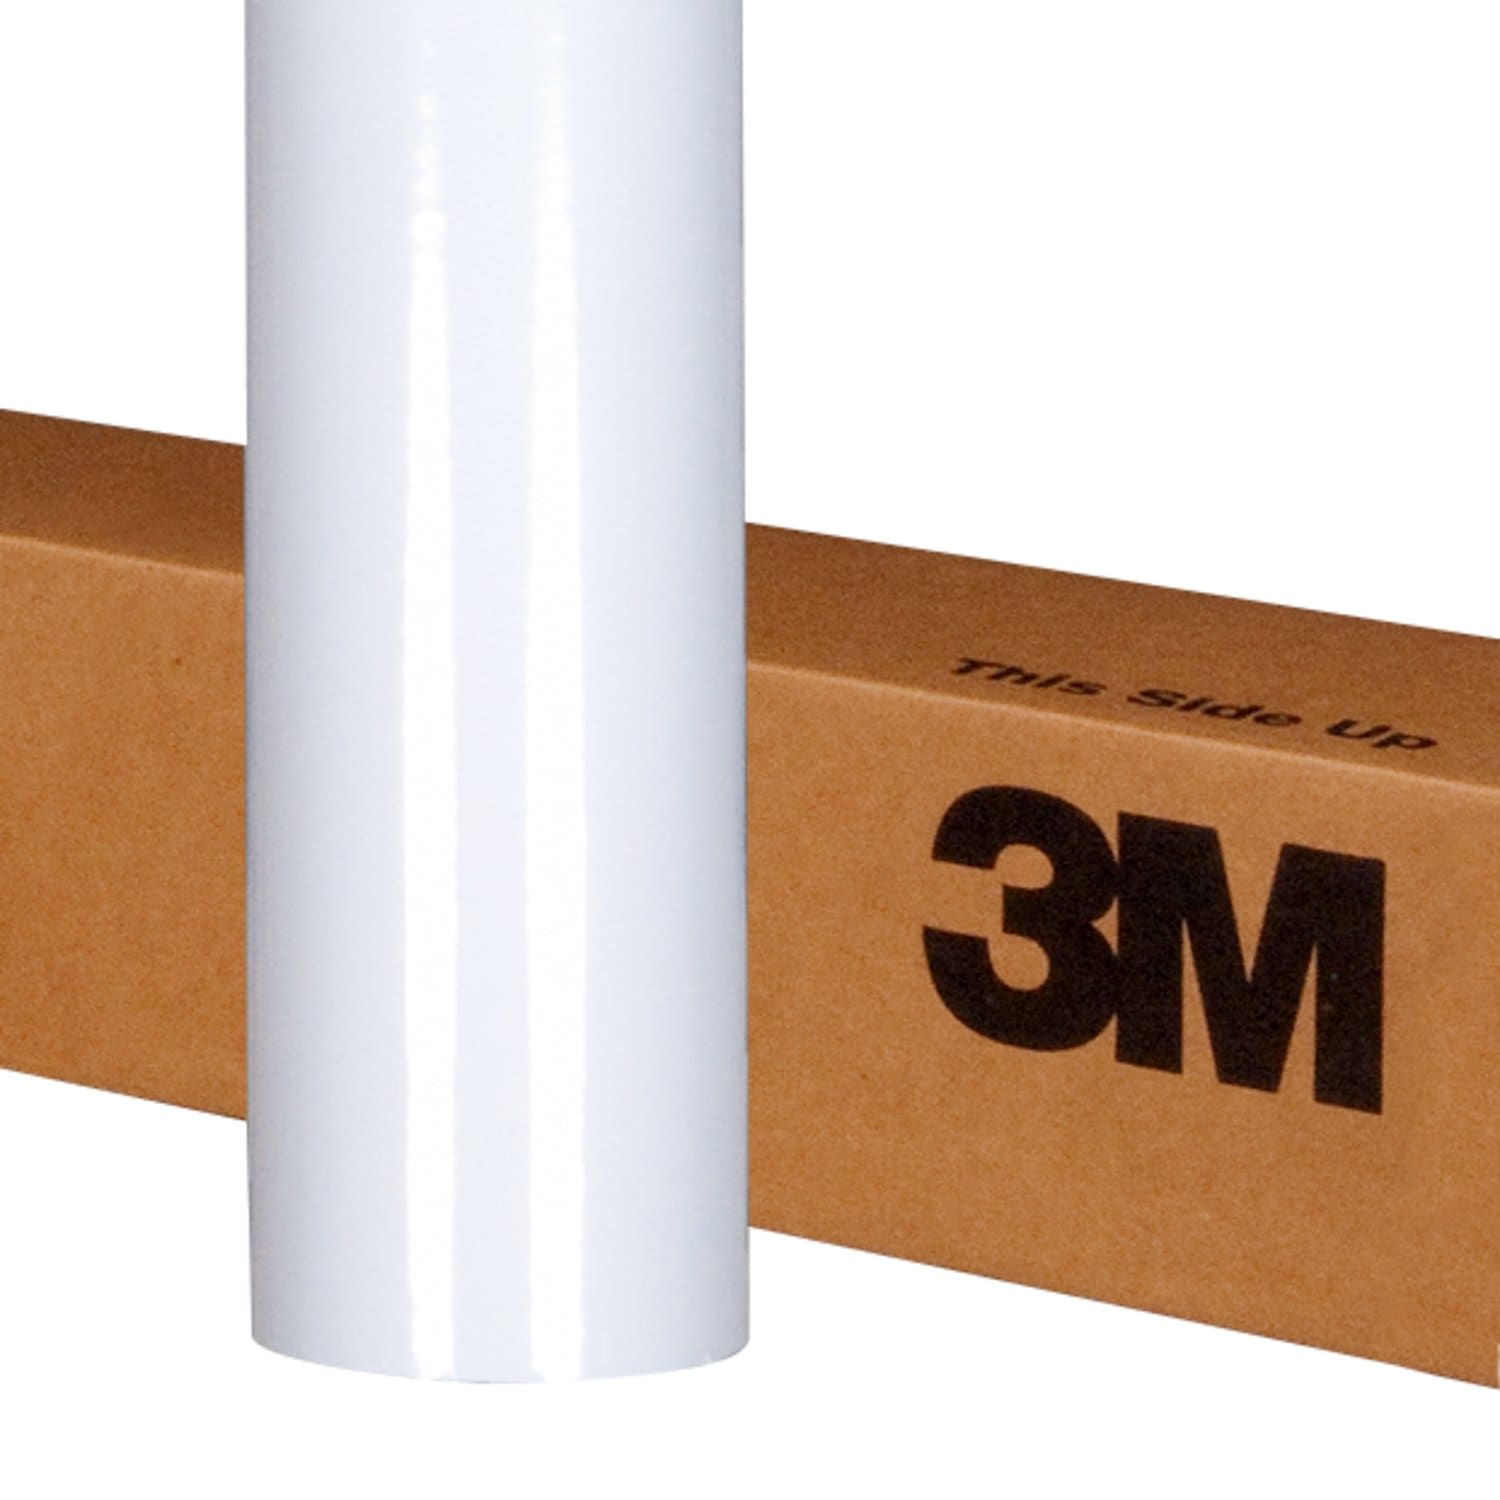 7000056078 - 3M Scotchcal Graphic Film IJ3650-10, White, 54 in x 50 yd, 1 Roll/Case